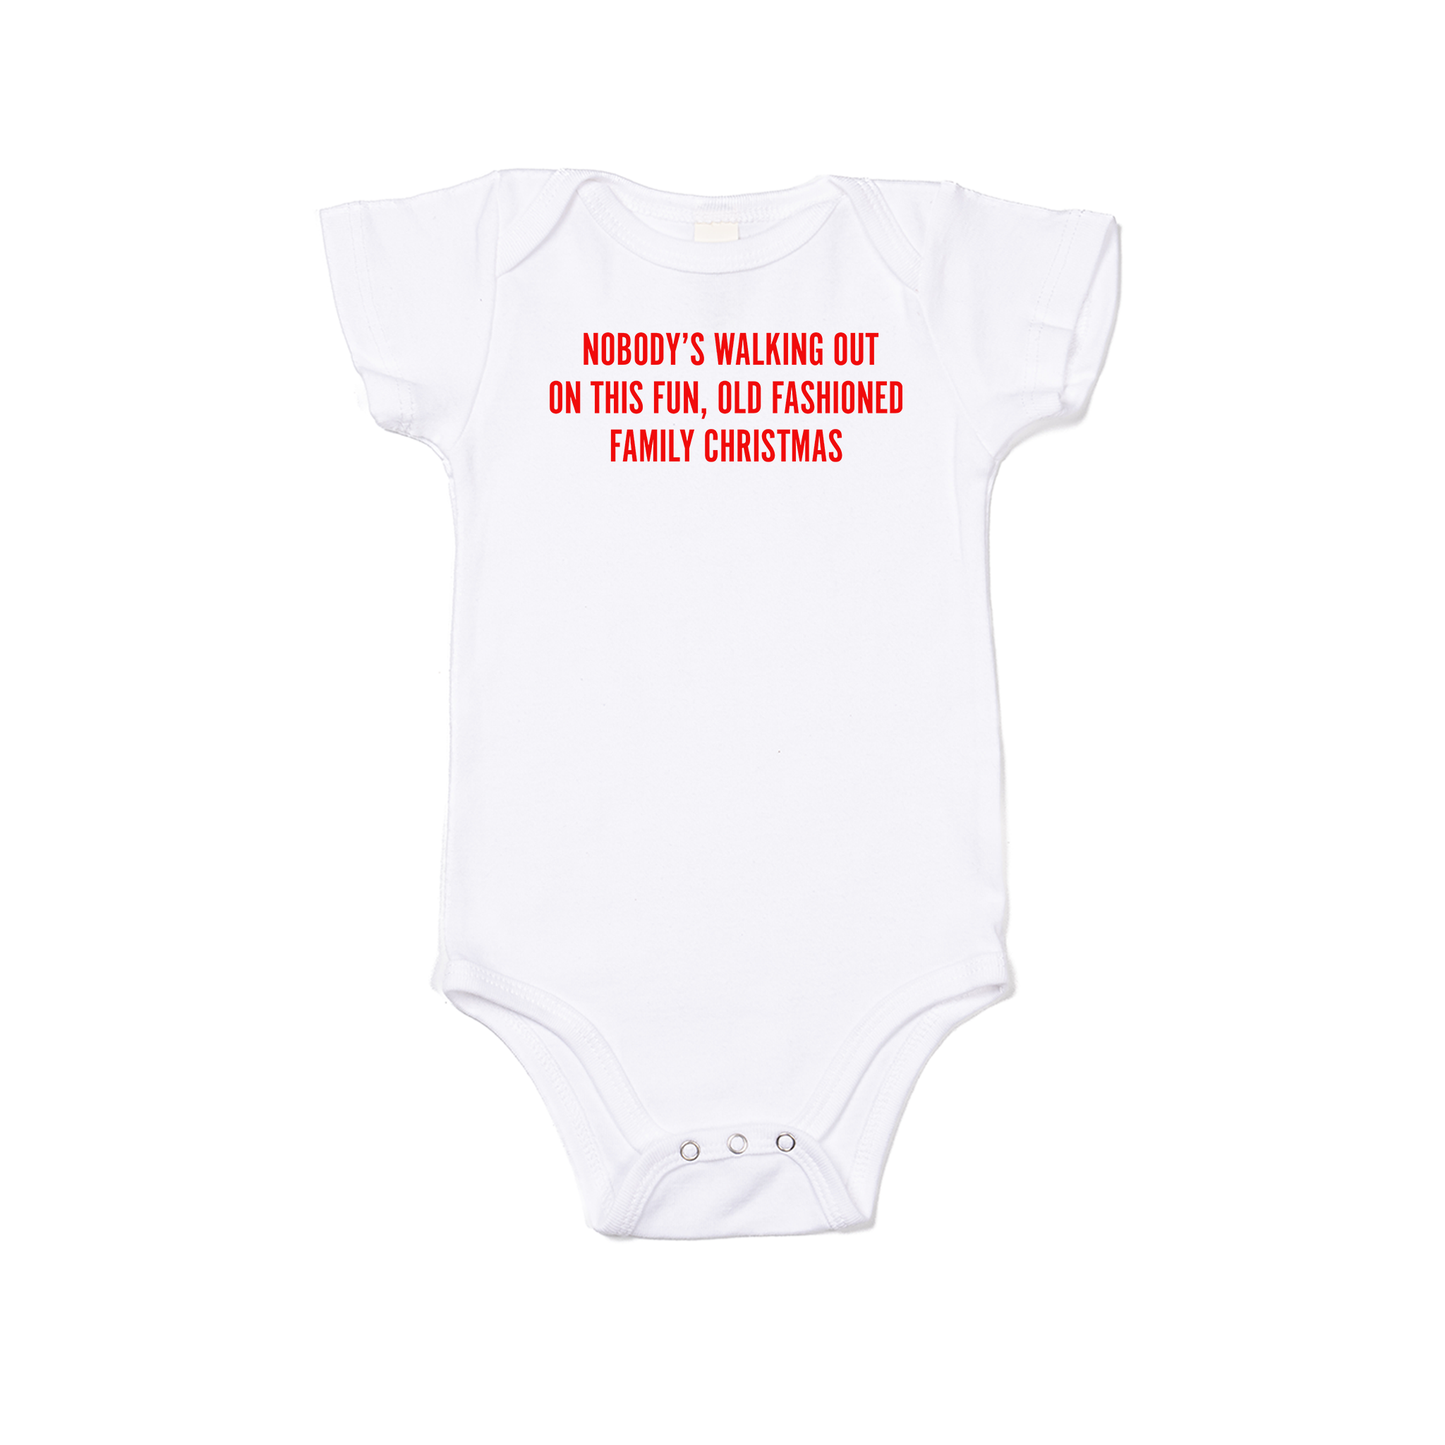 Nobody's walking out on this fun old fashioned family Christmas (Red) - Bodysuit (White, Short Sleeve)